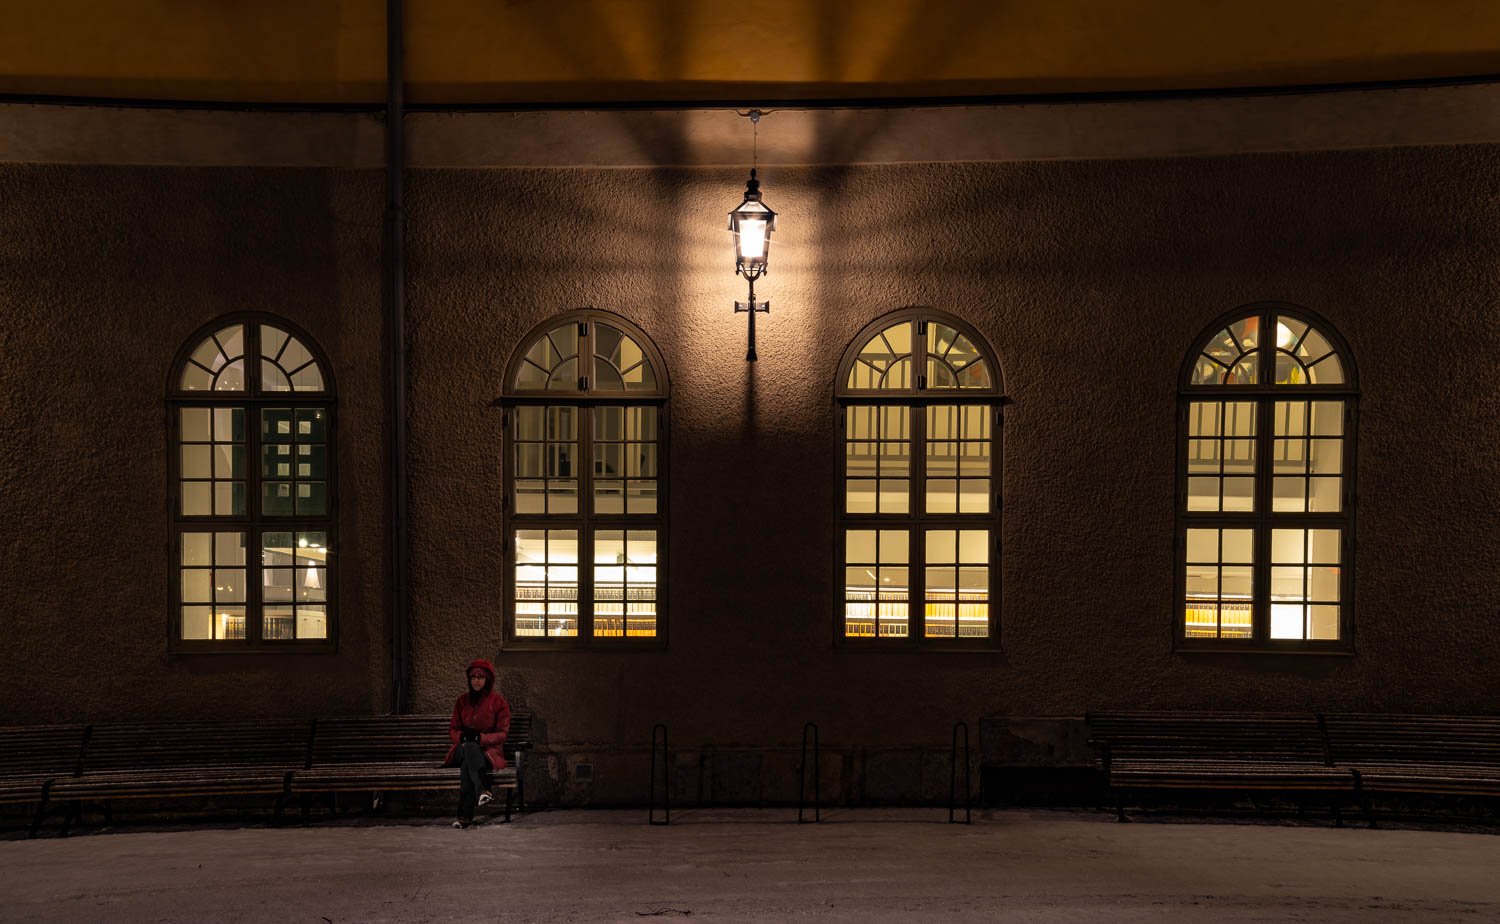 A shadowy capture of a big hall with a men sitting on a bench, Sweden #13